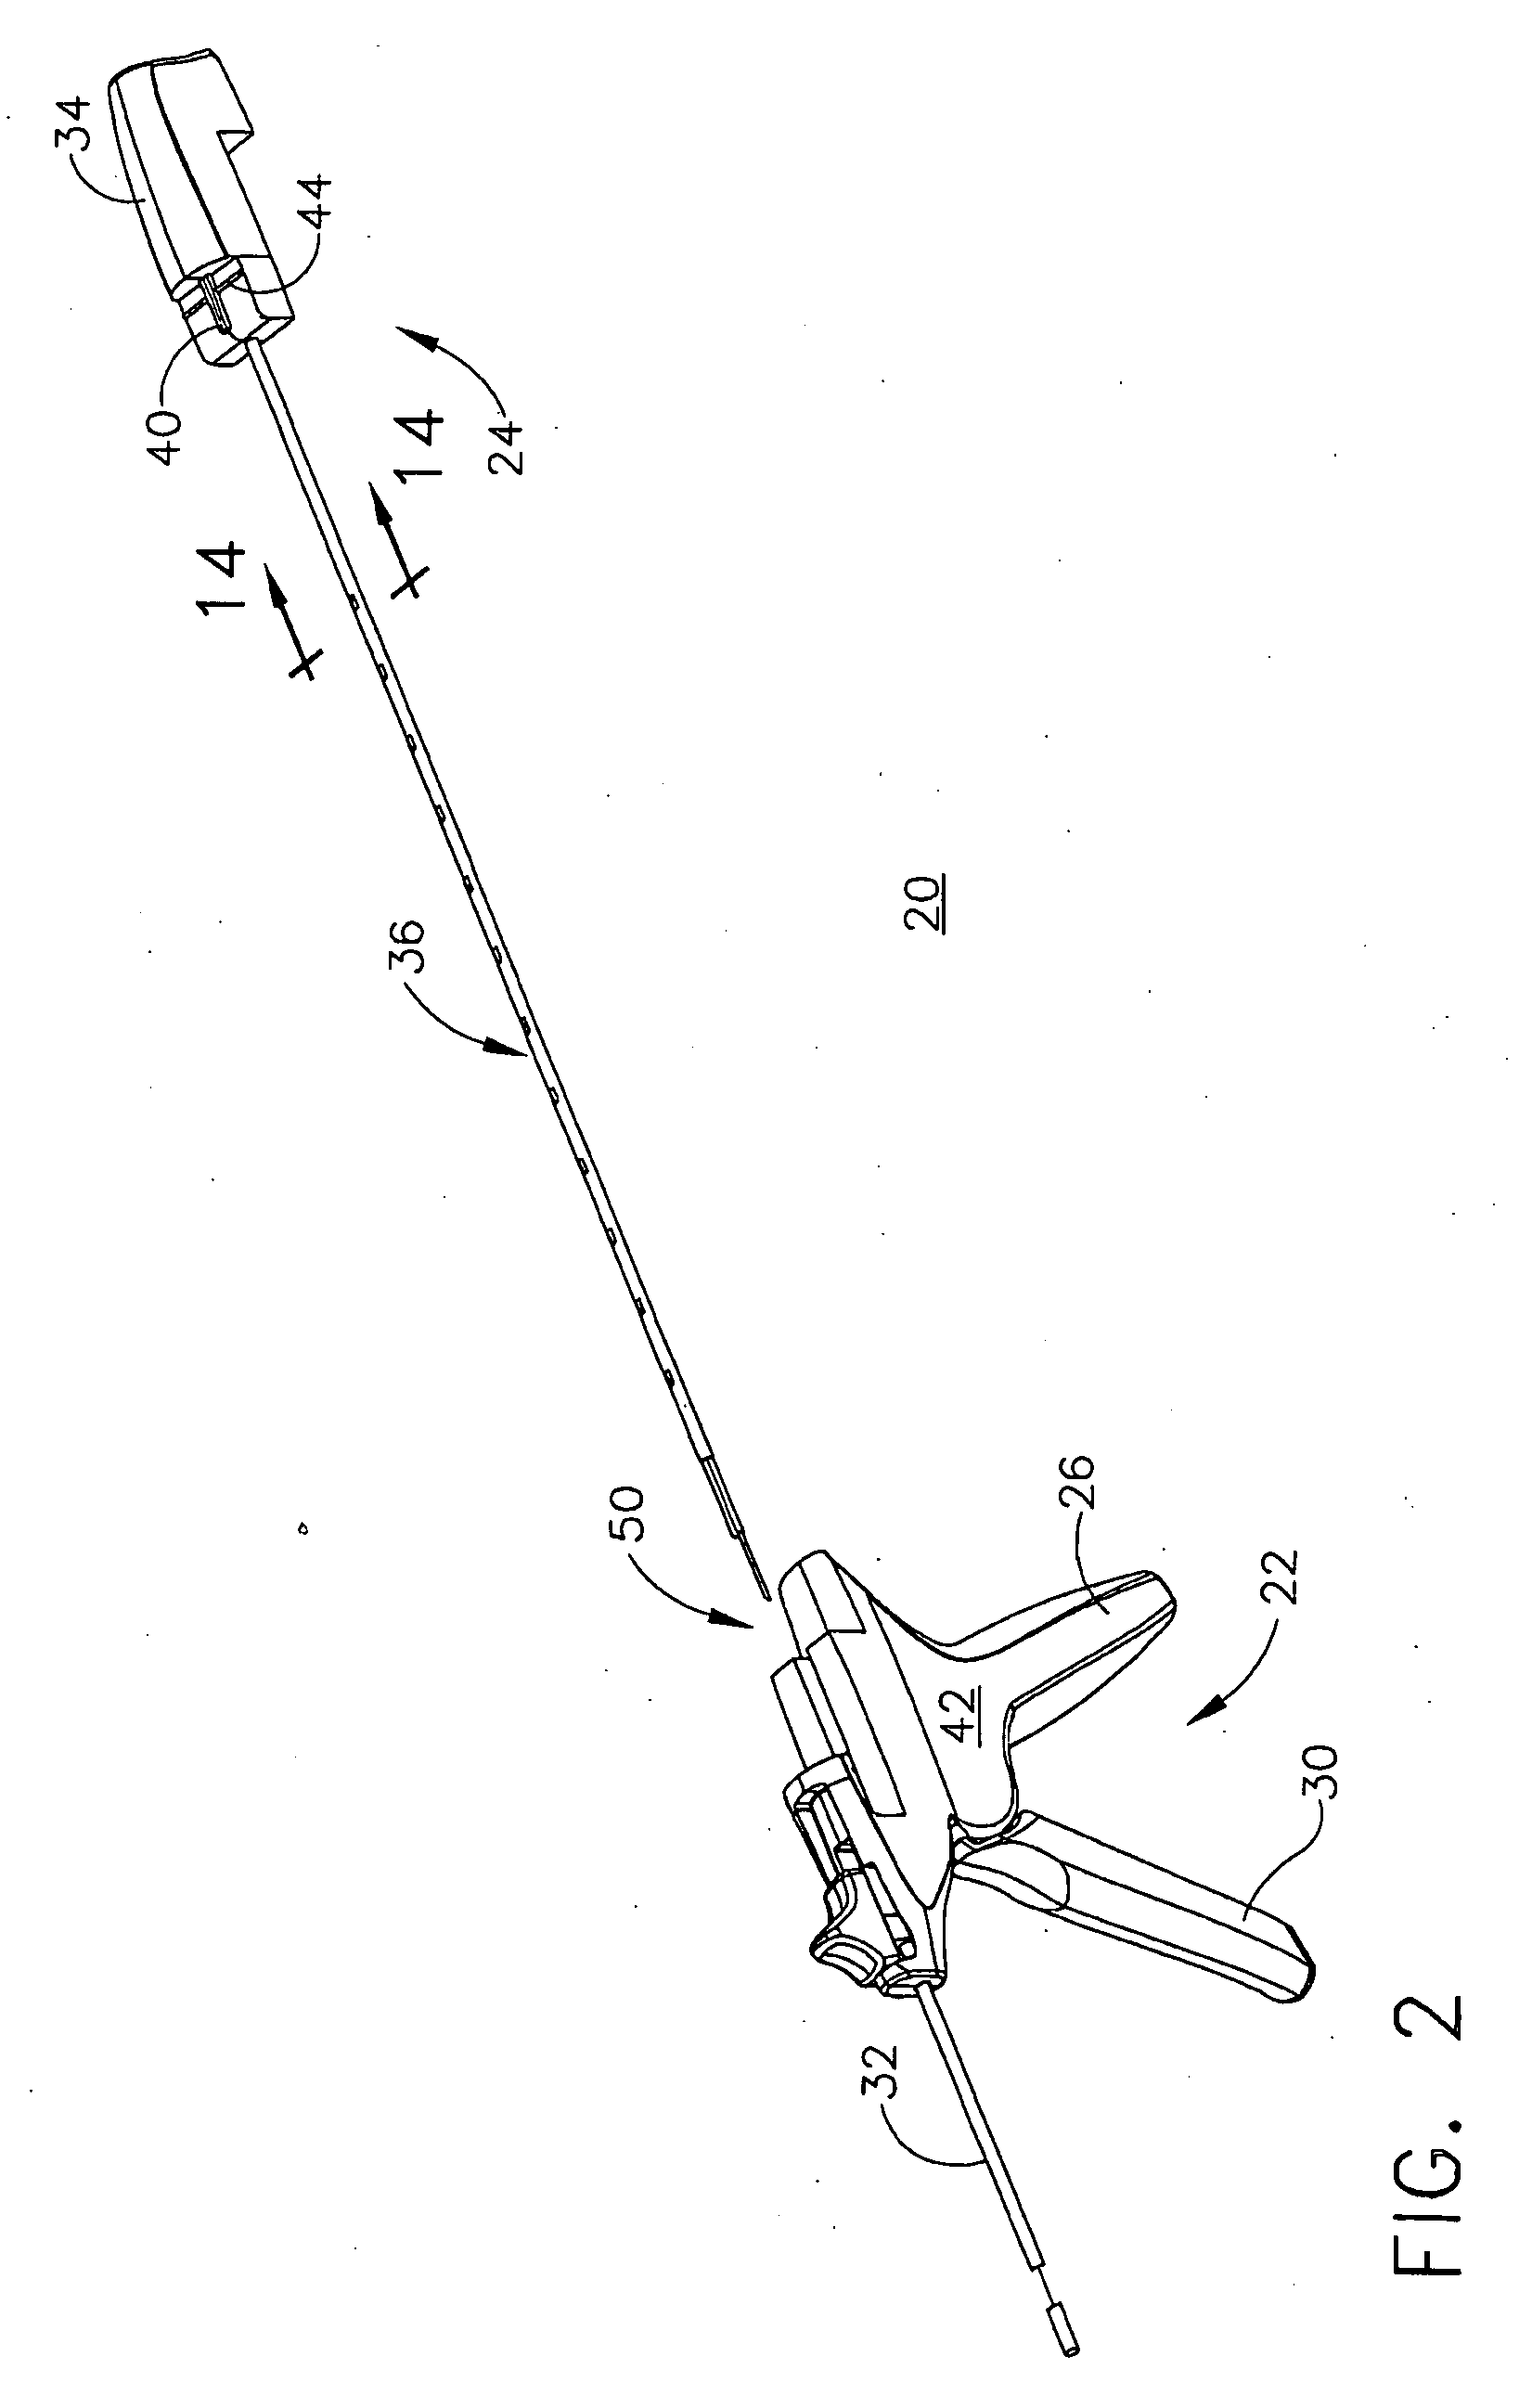 Reloadable laparoscopic fastener deploying device with disposable cartridge use in a gastric volume reduction procedure